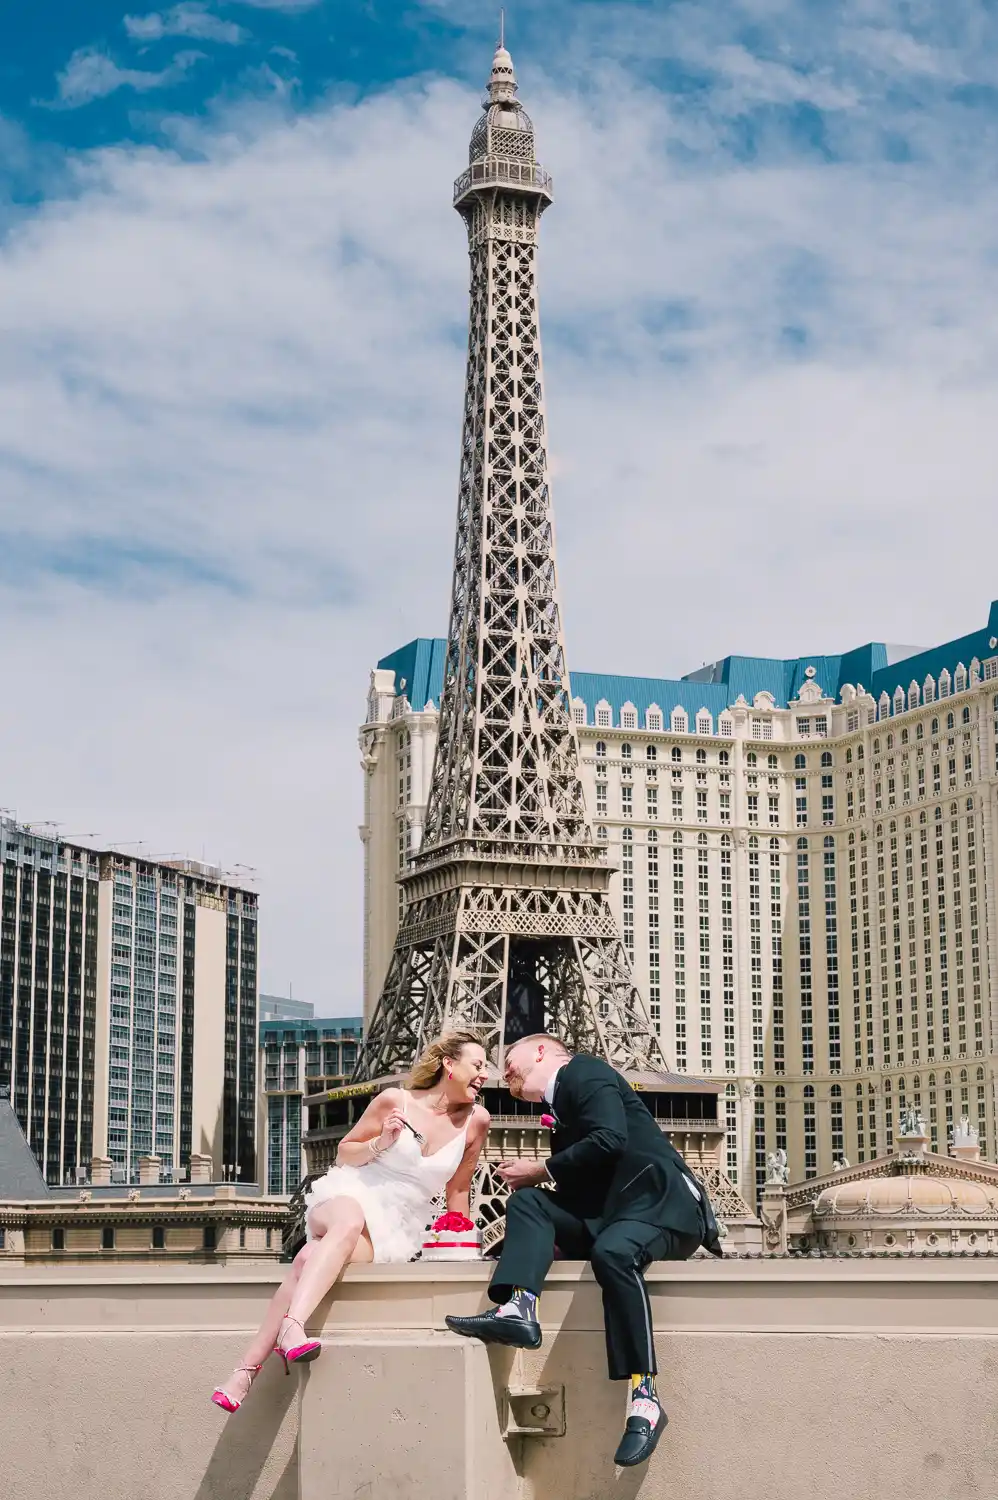 Bellagio hotel cake cutting with Eiffel tower view and Paris hotel